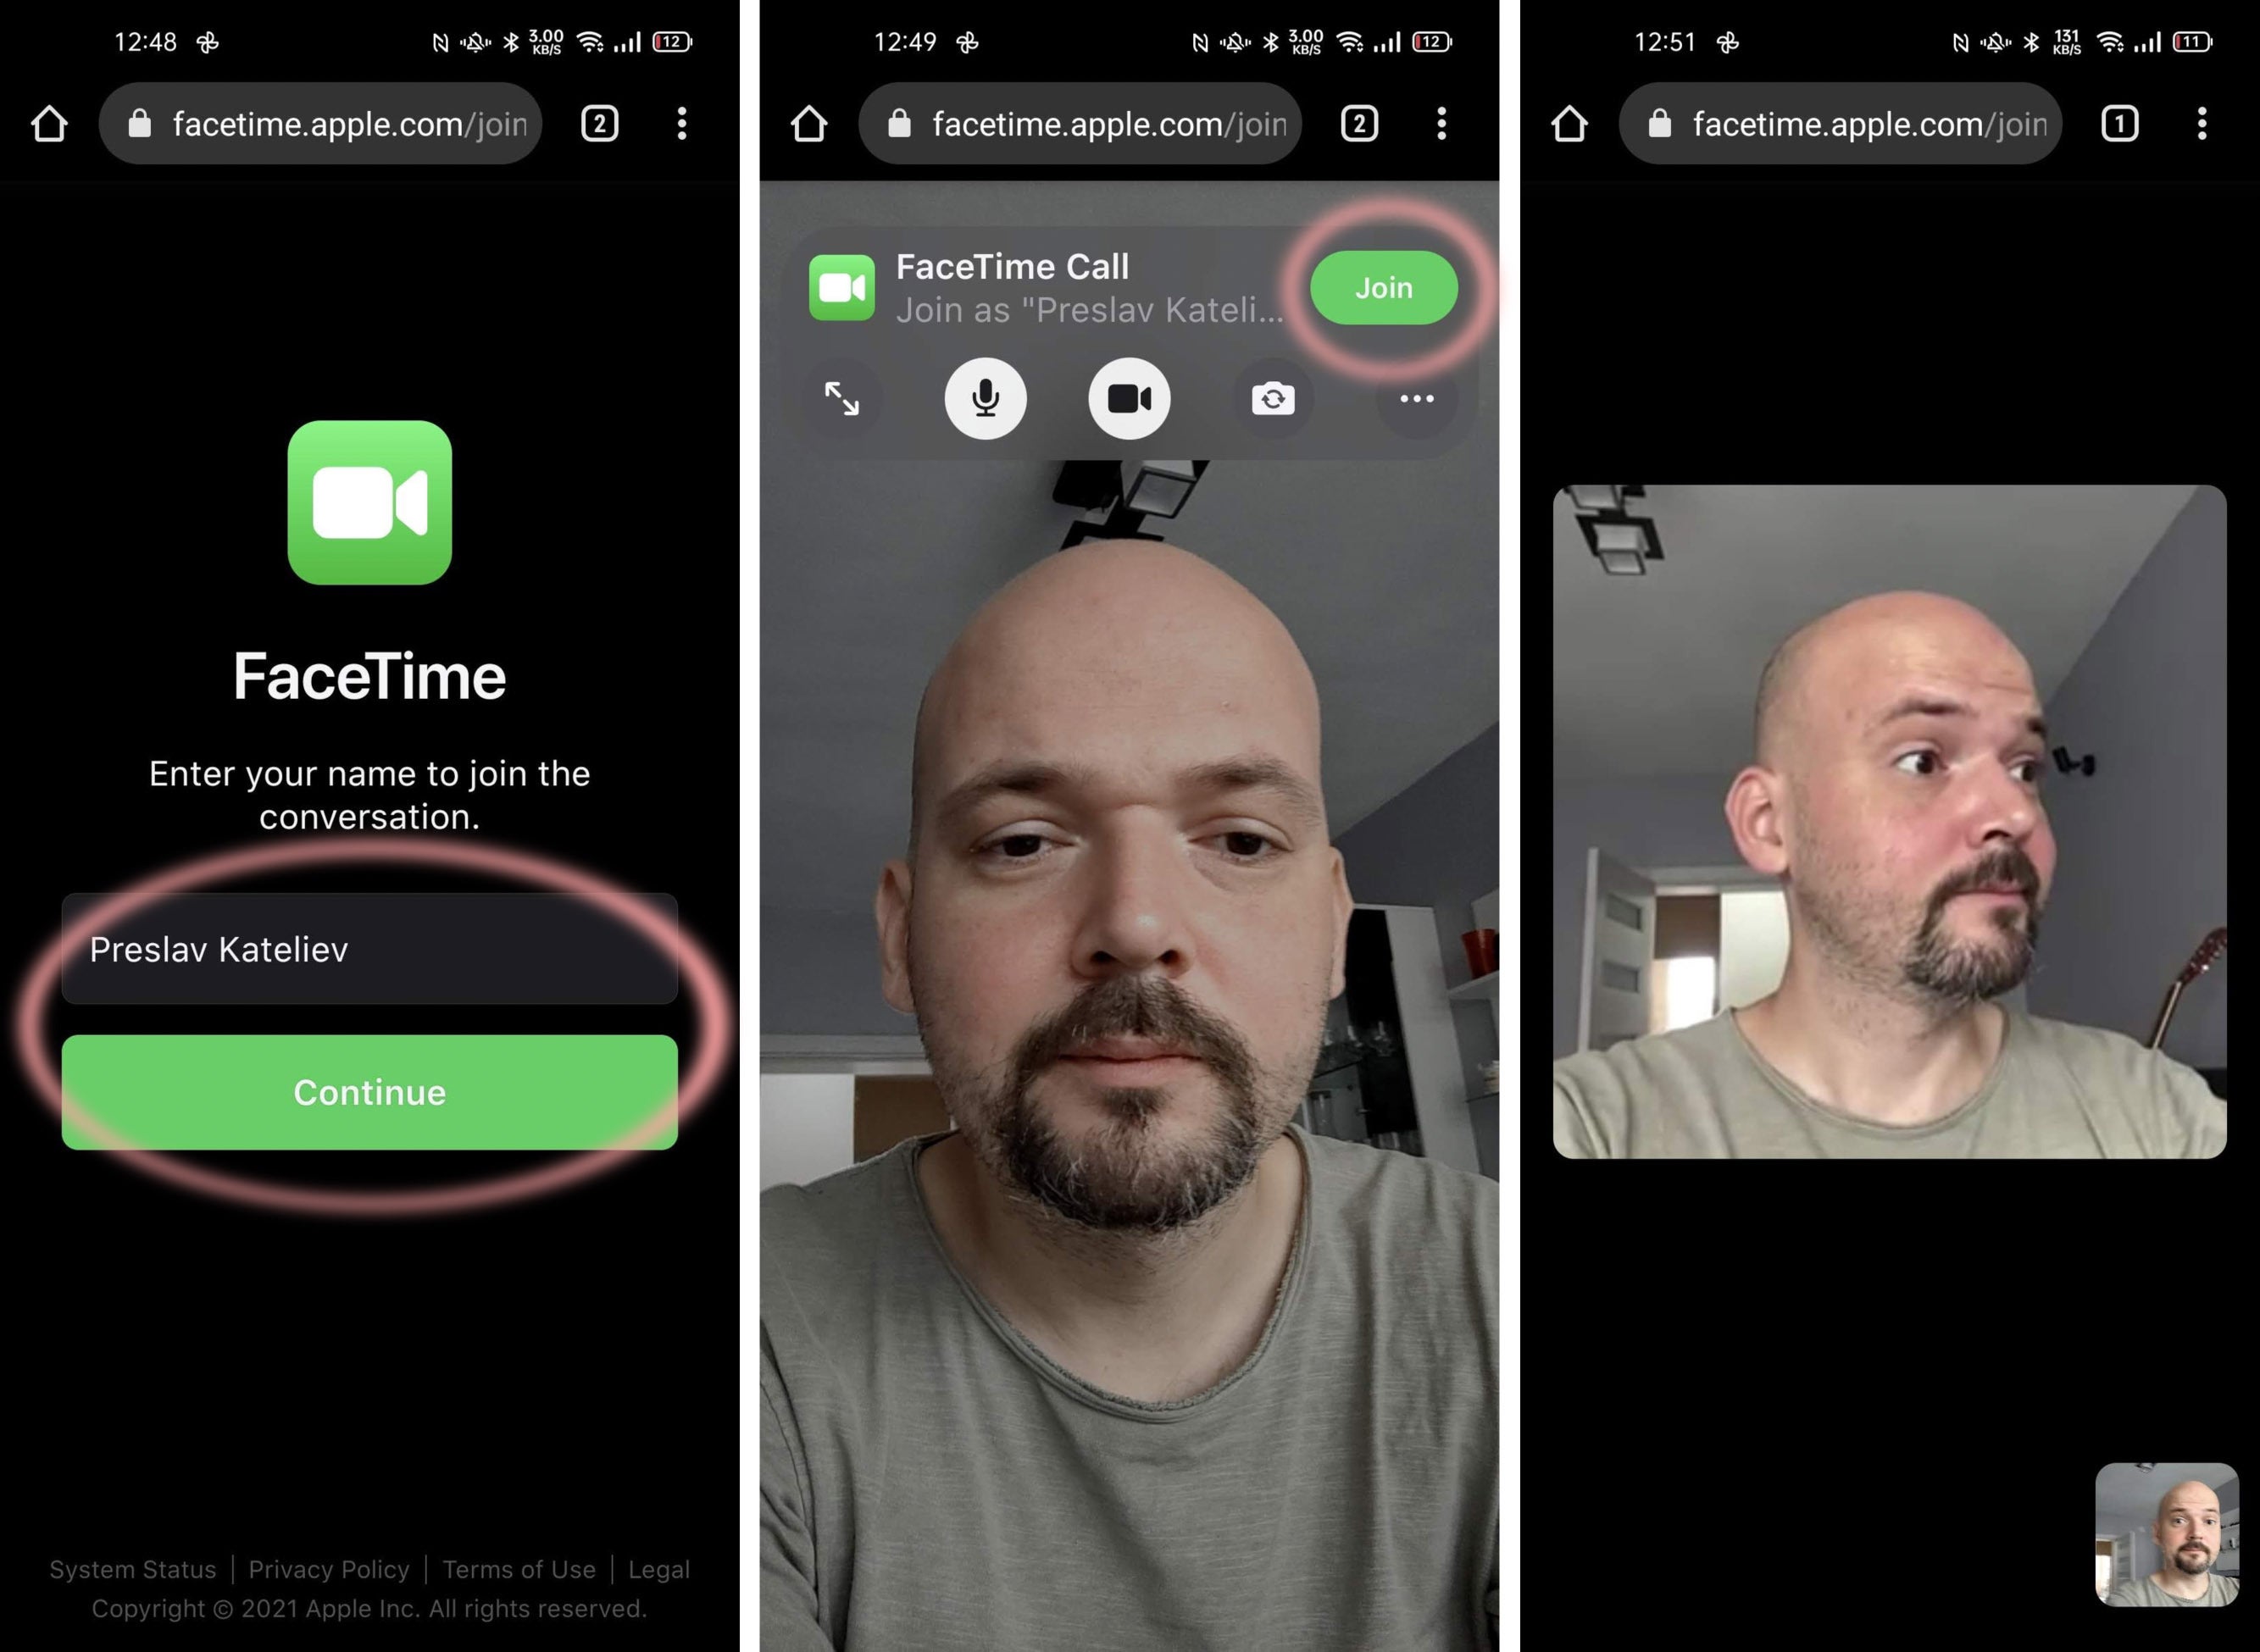 How it looks on Android - How to FaceTime Android users from iPhone